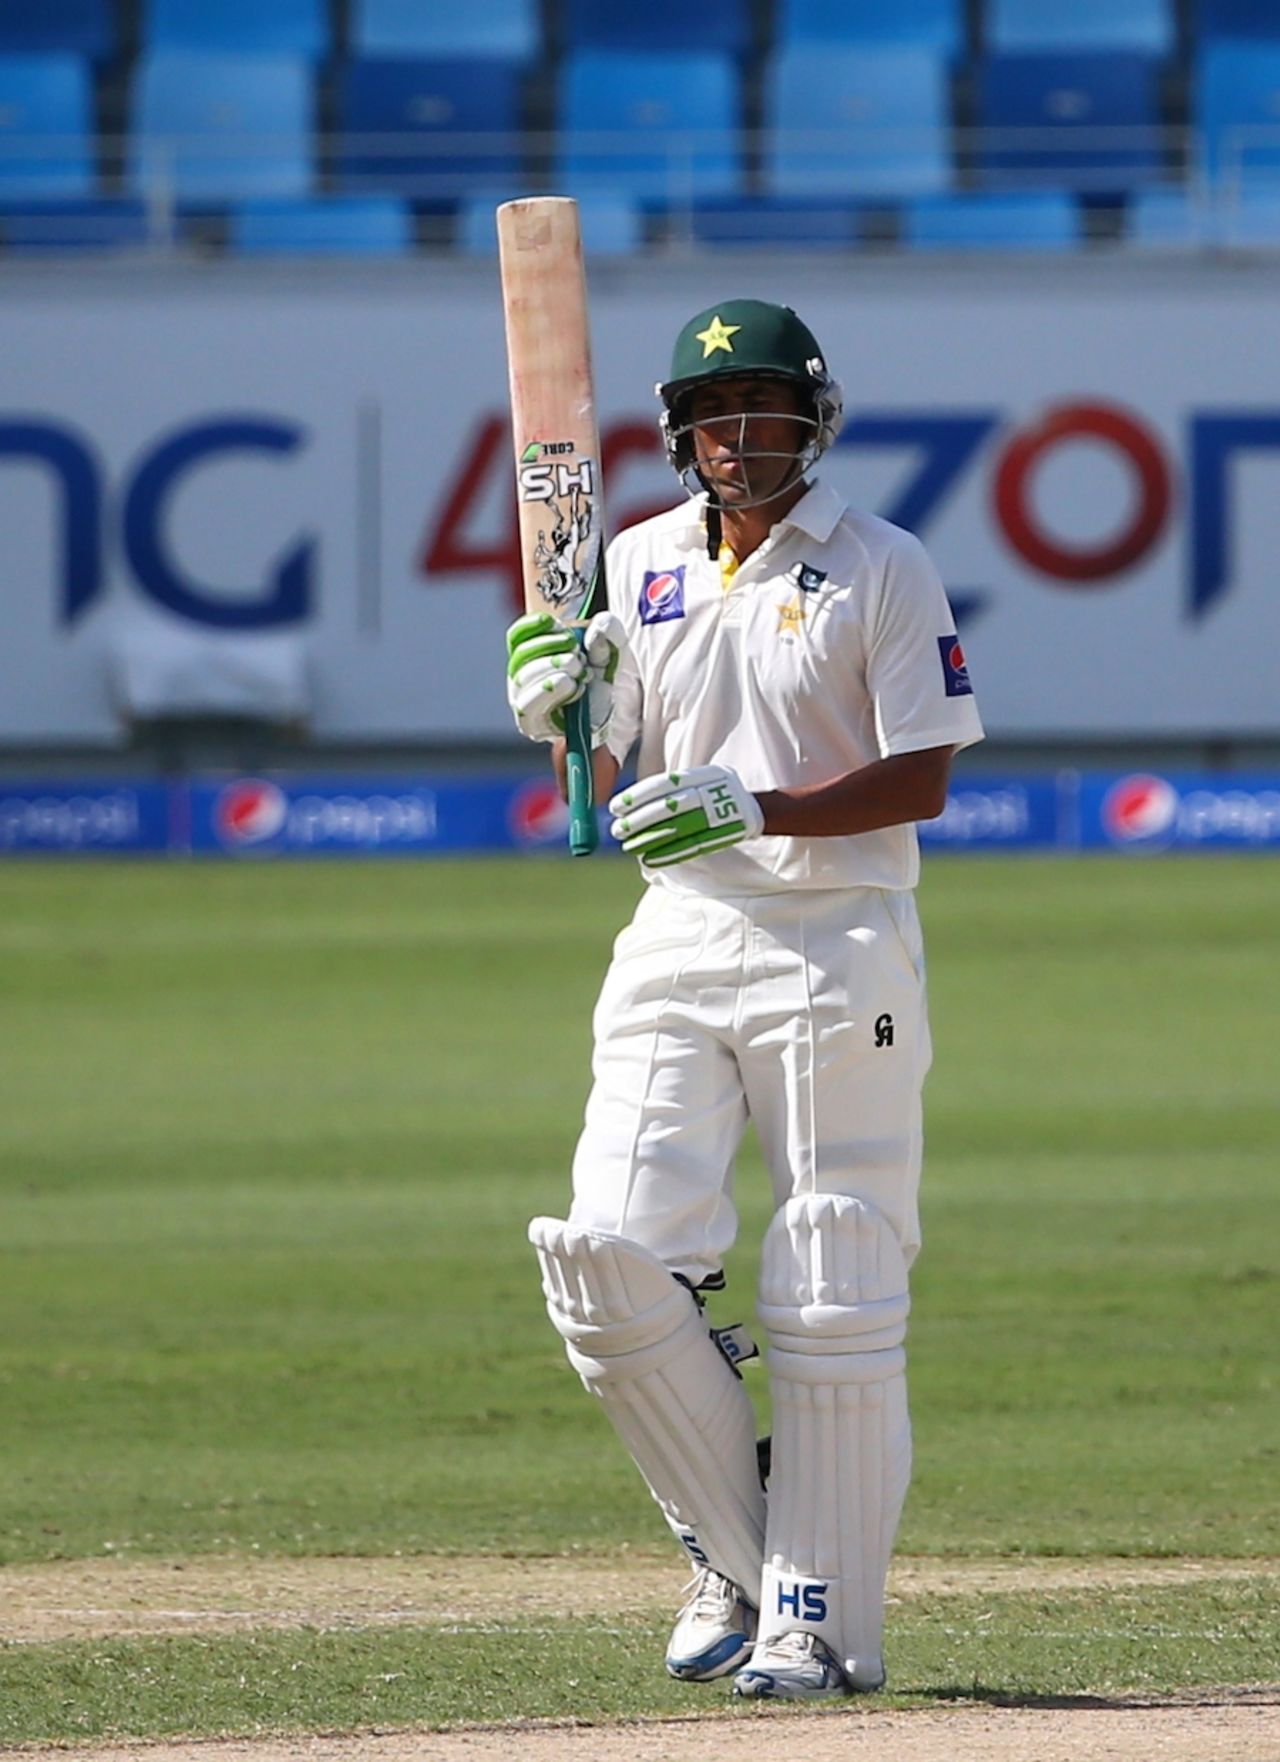 Younis Khan brings up his 29th Test fifty, Pakistan v Australia, 1st Test, Dubai, 1st day, October 22, 2014